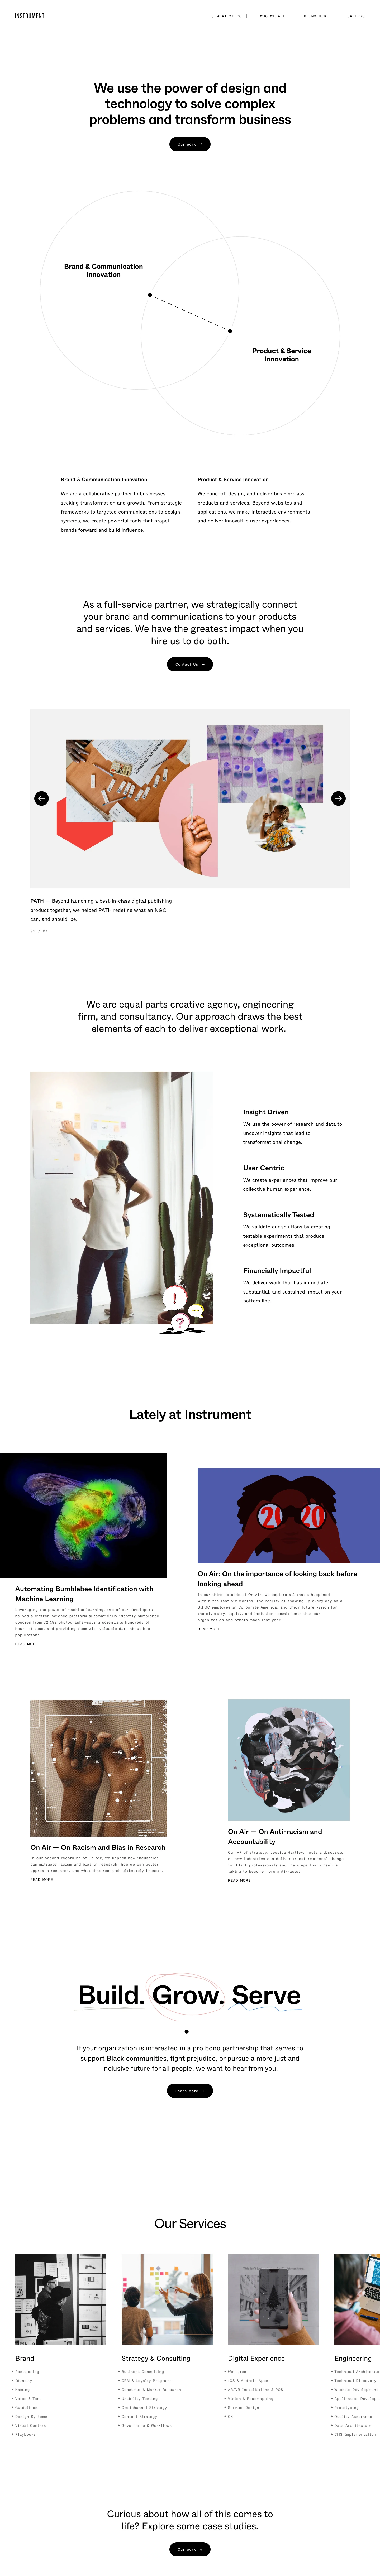 Instrument Landing Page Example: We are equal parts creative agency, engineering firm, and consultancy. Our approach draws the best elements of each to deliver exceptional work.